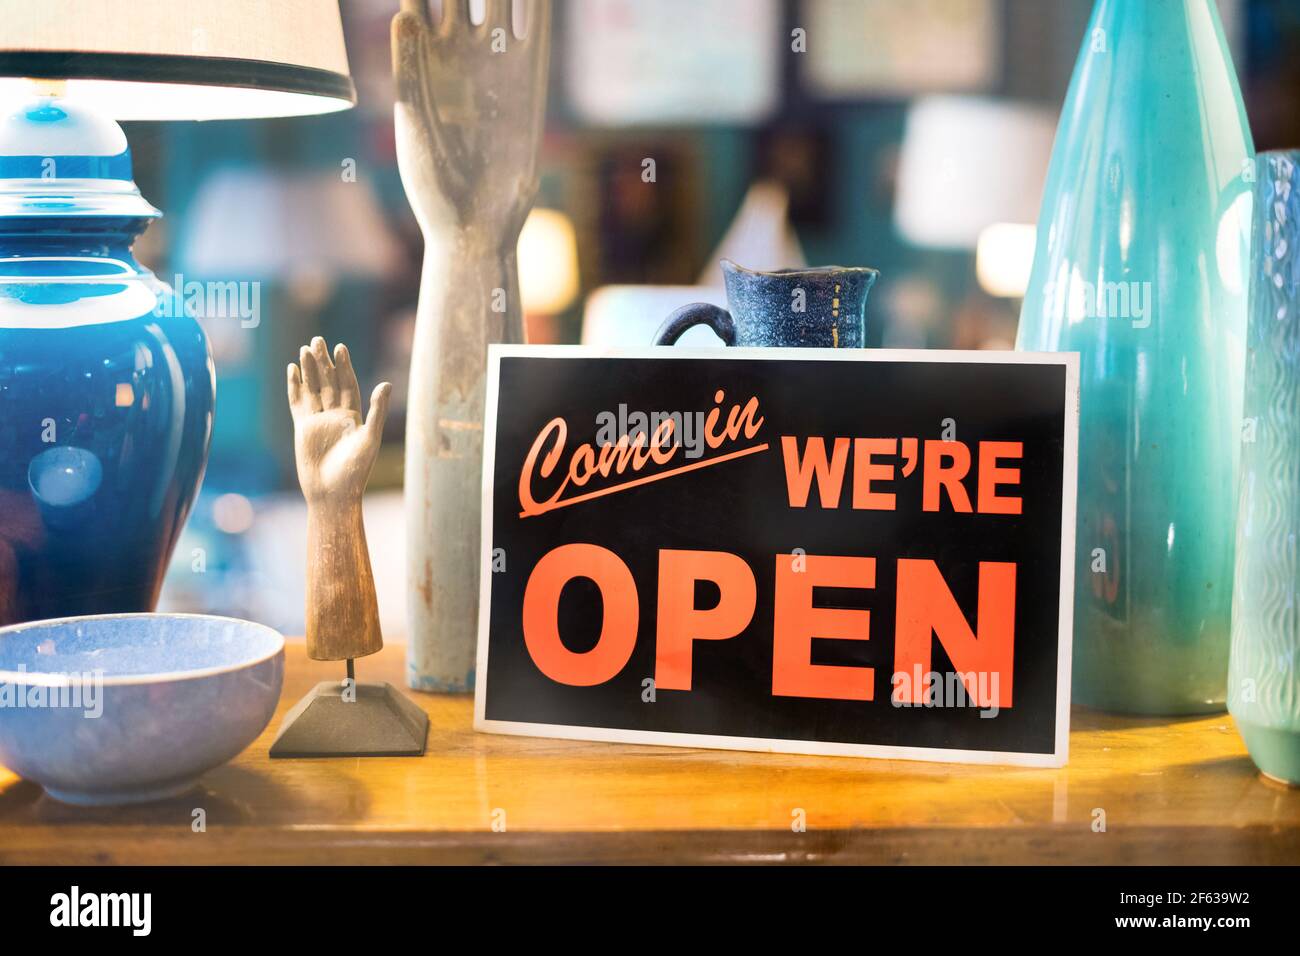 Come In We're Open for business or trading sign in a window of a shop or store propped against colorful handmade ceramics in close up Stock Photo